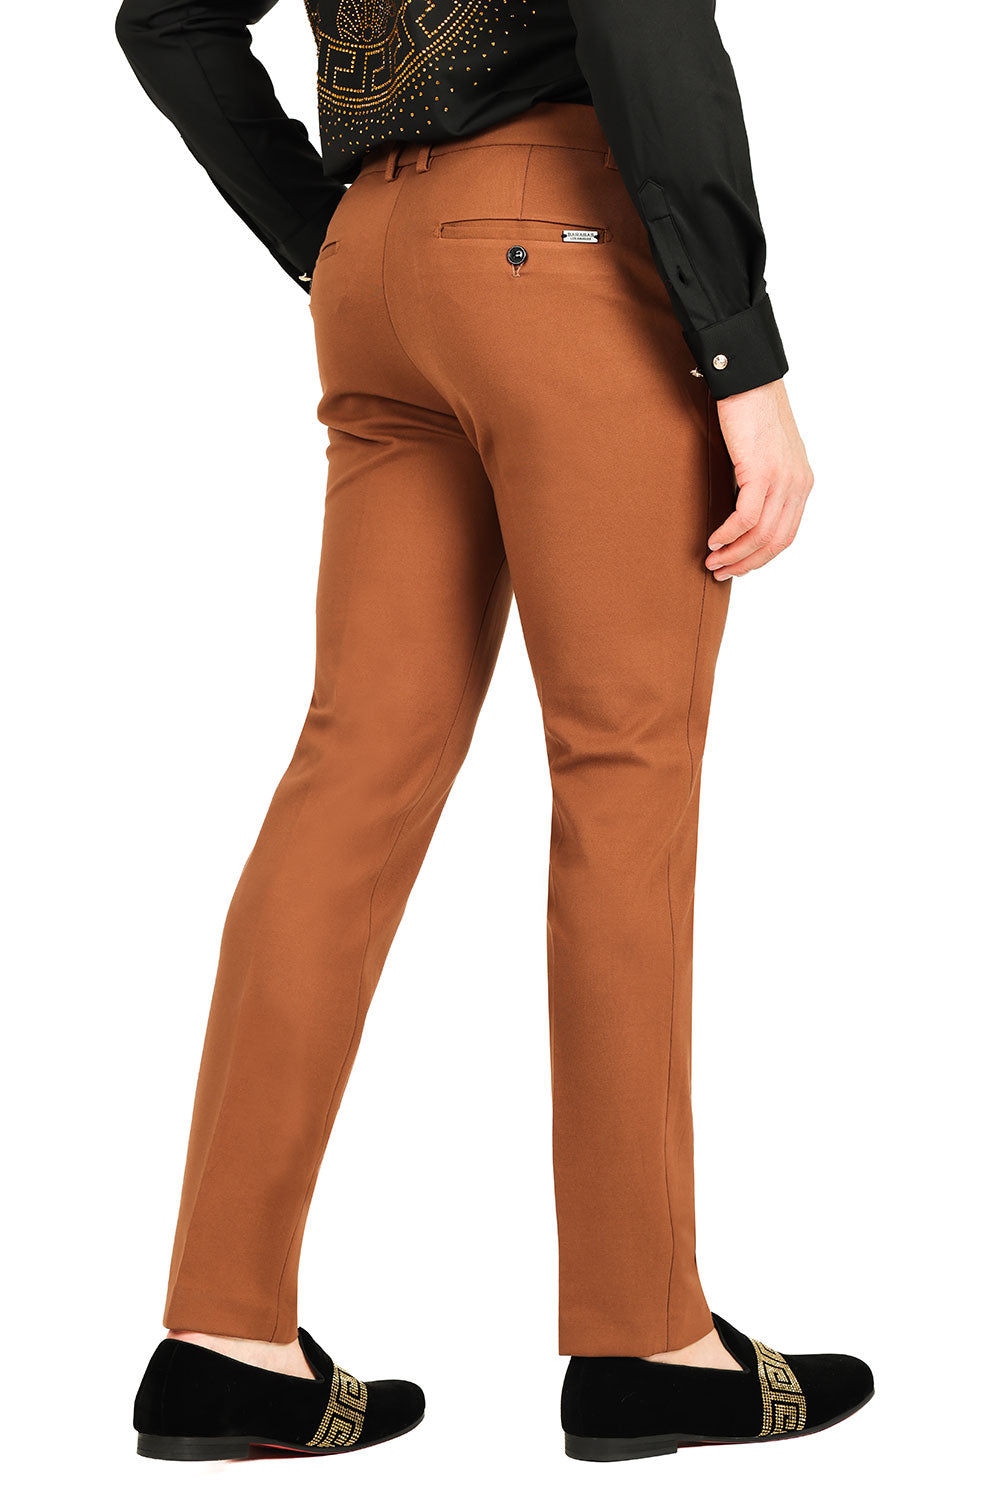 Barabas Men's Solid Color Basic Essential Chino Dress Pants 2CP196 mocha brown